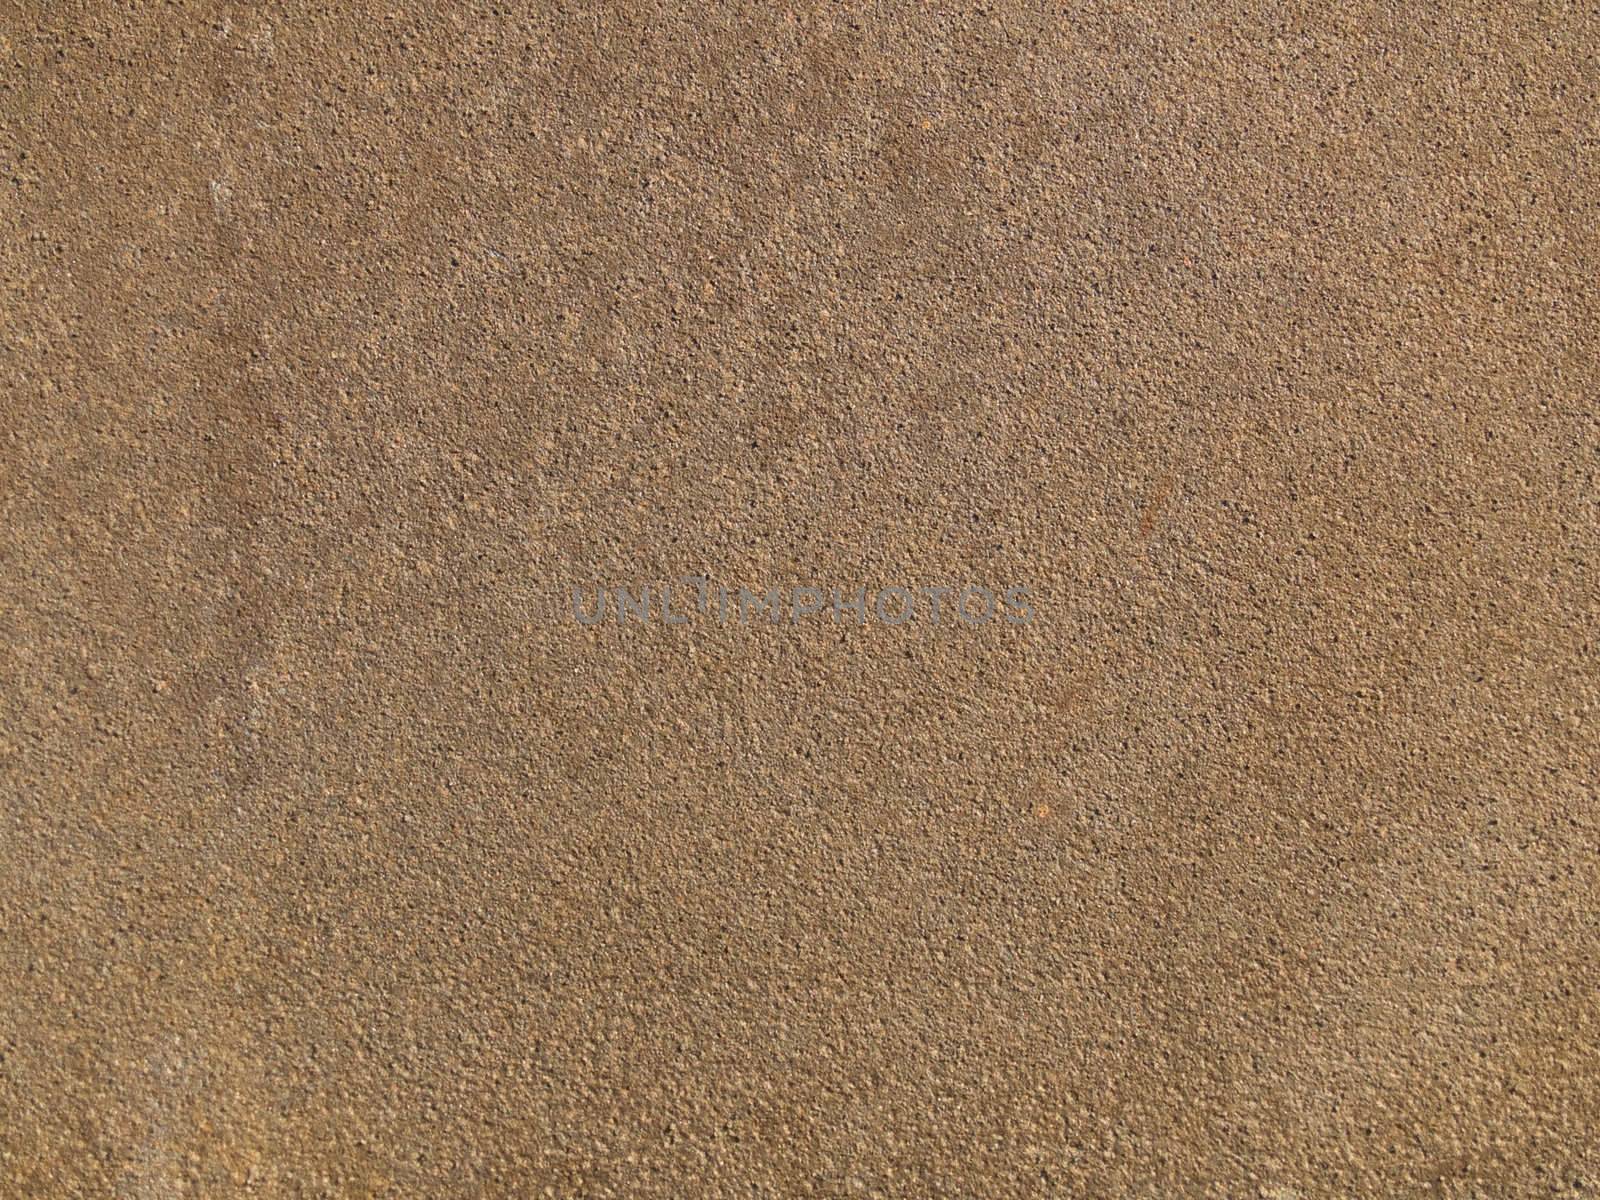 A cement and sand texture for a background.